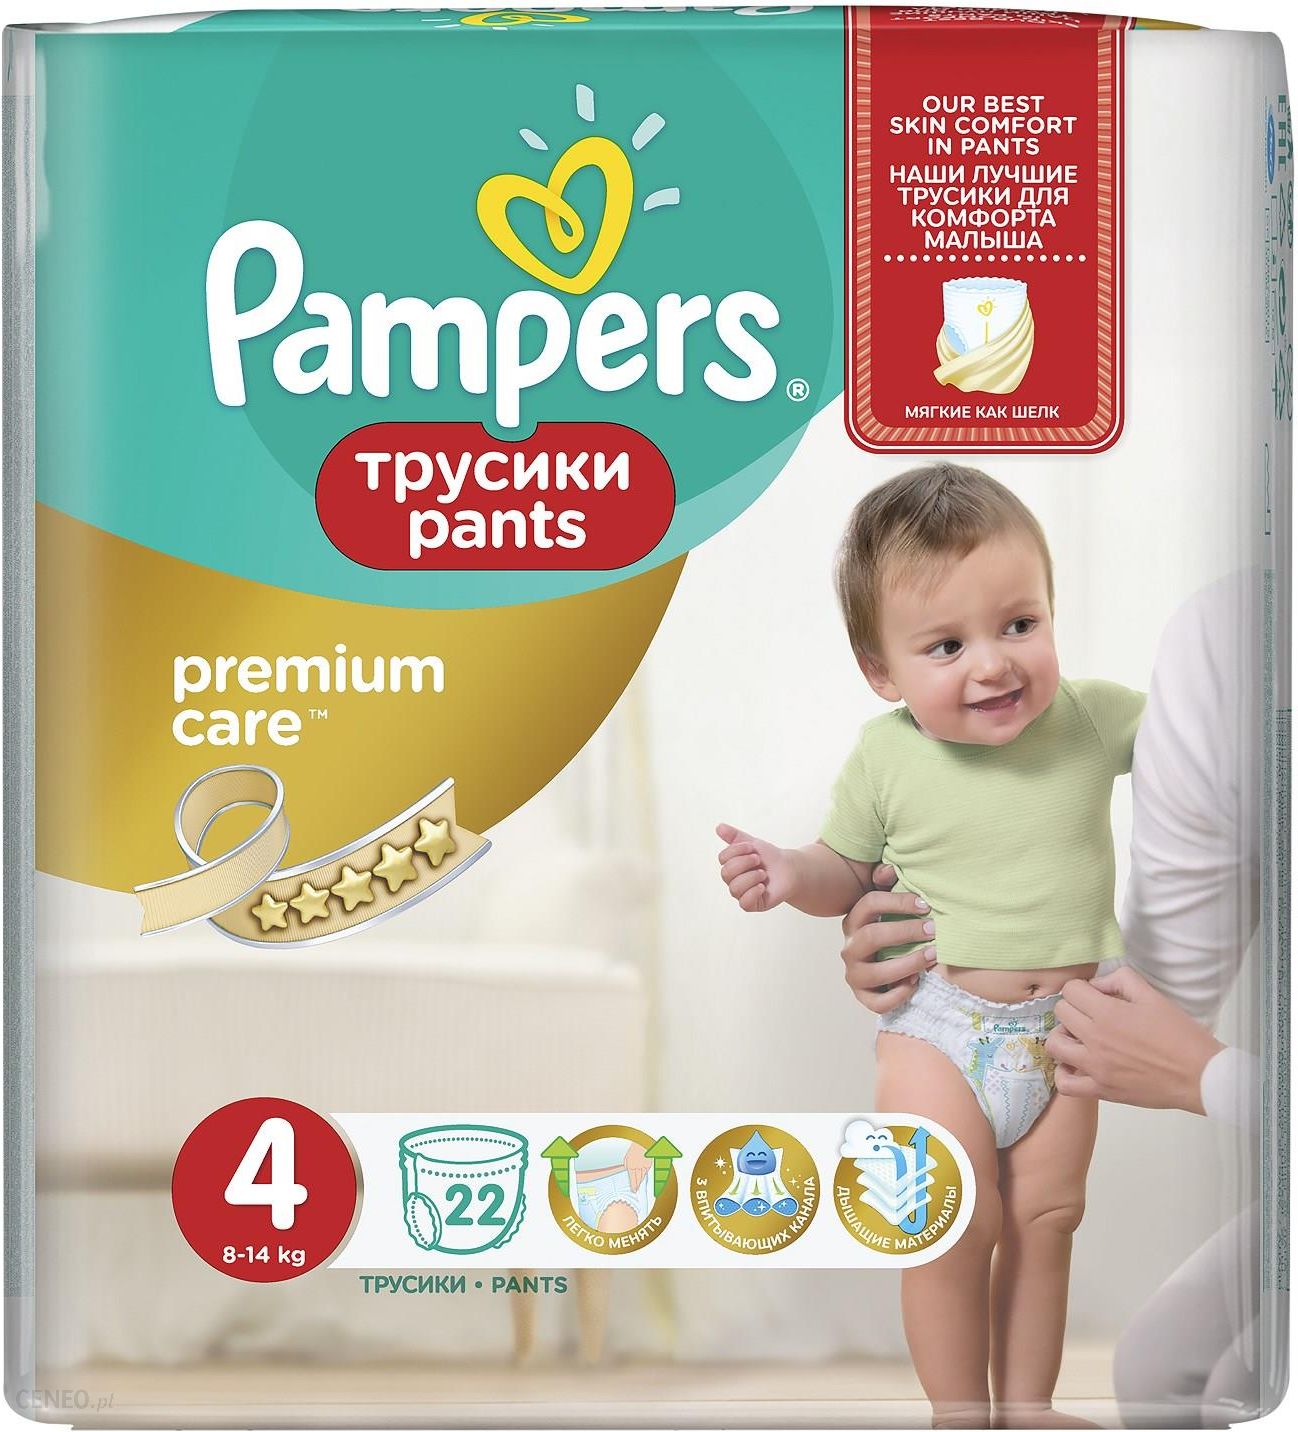 alcampo pampers